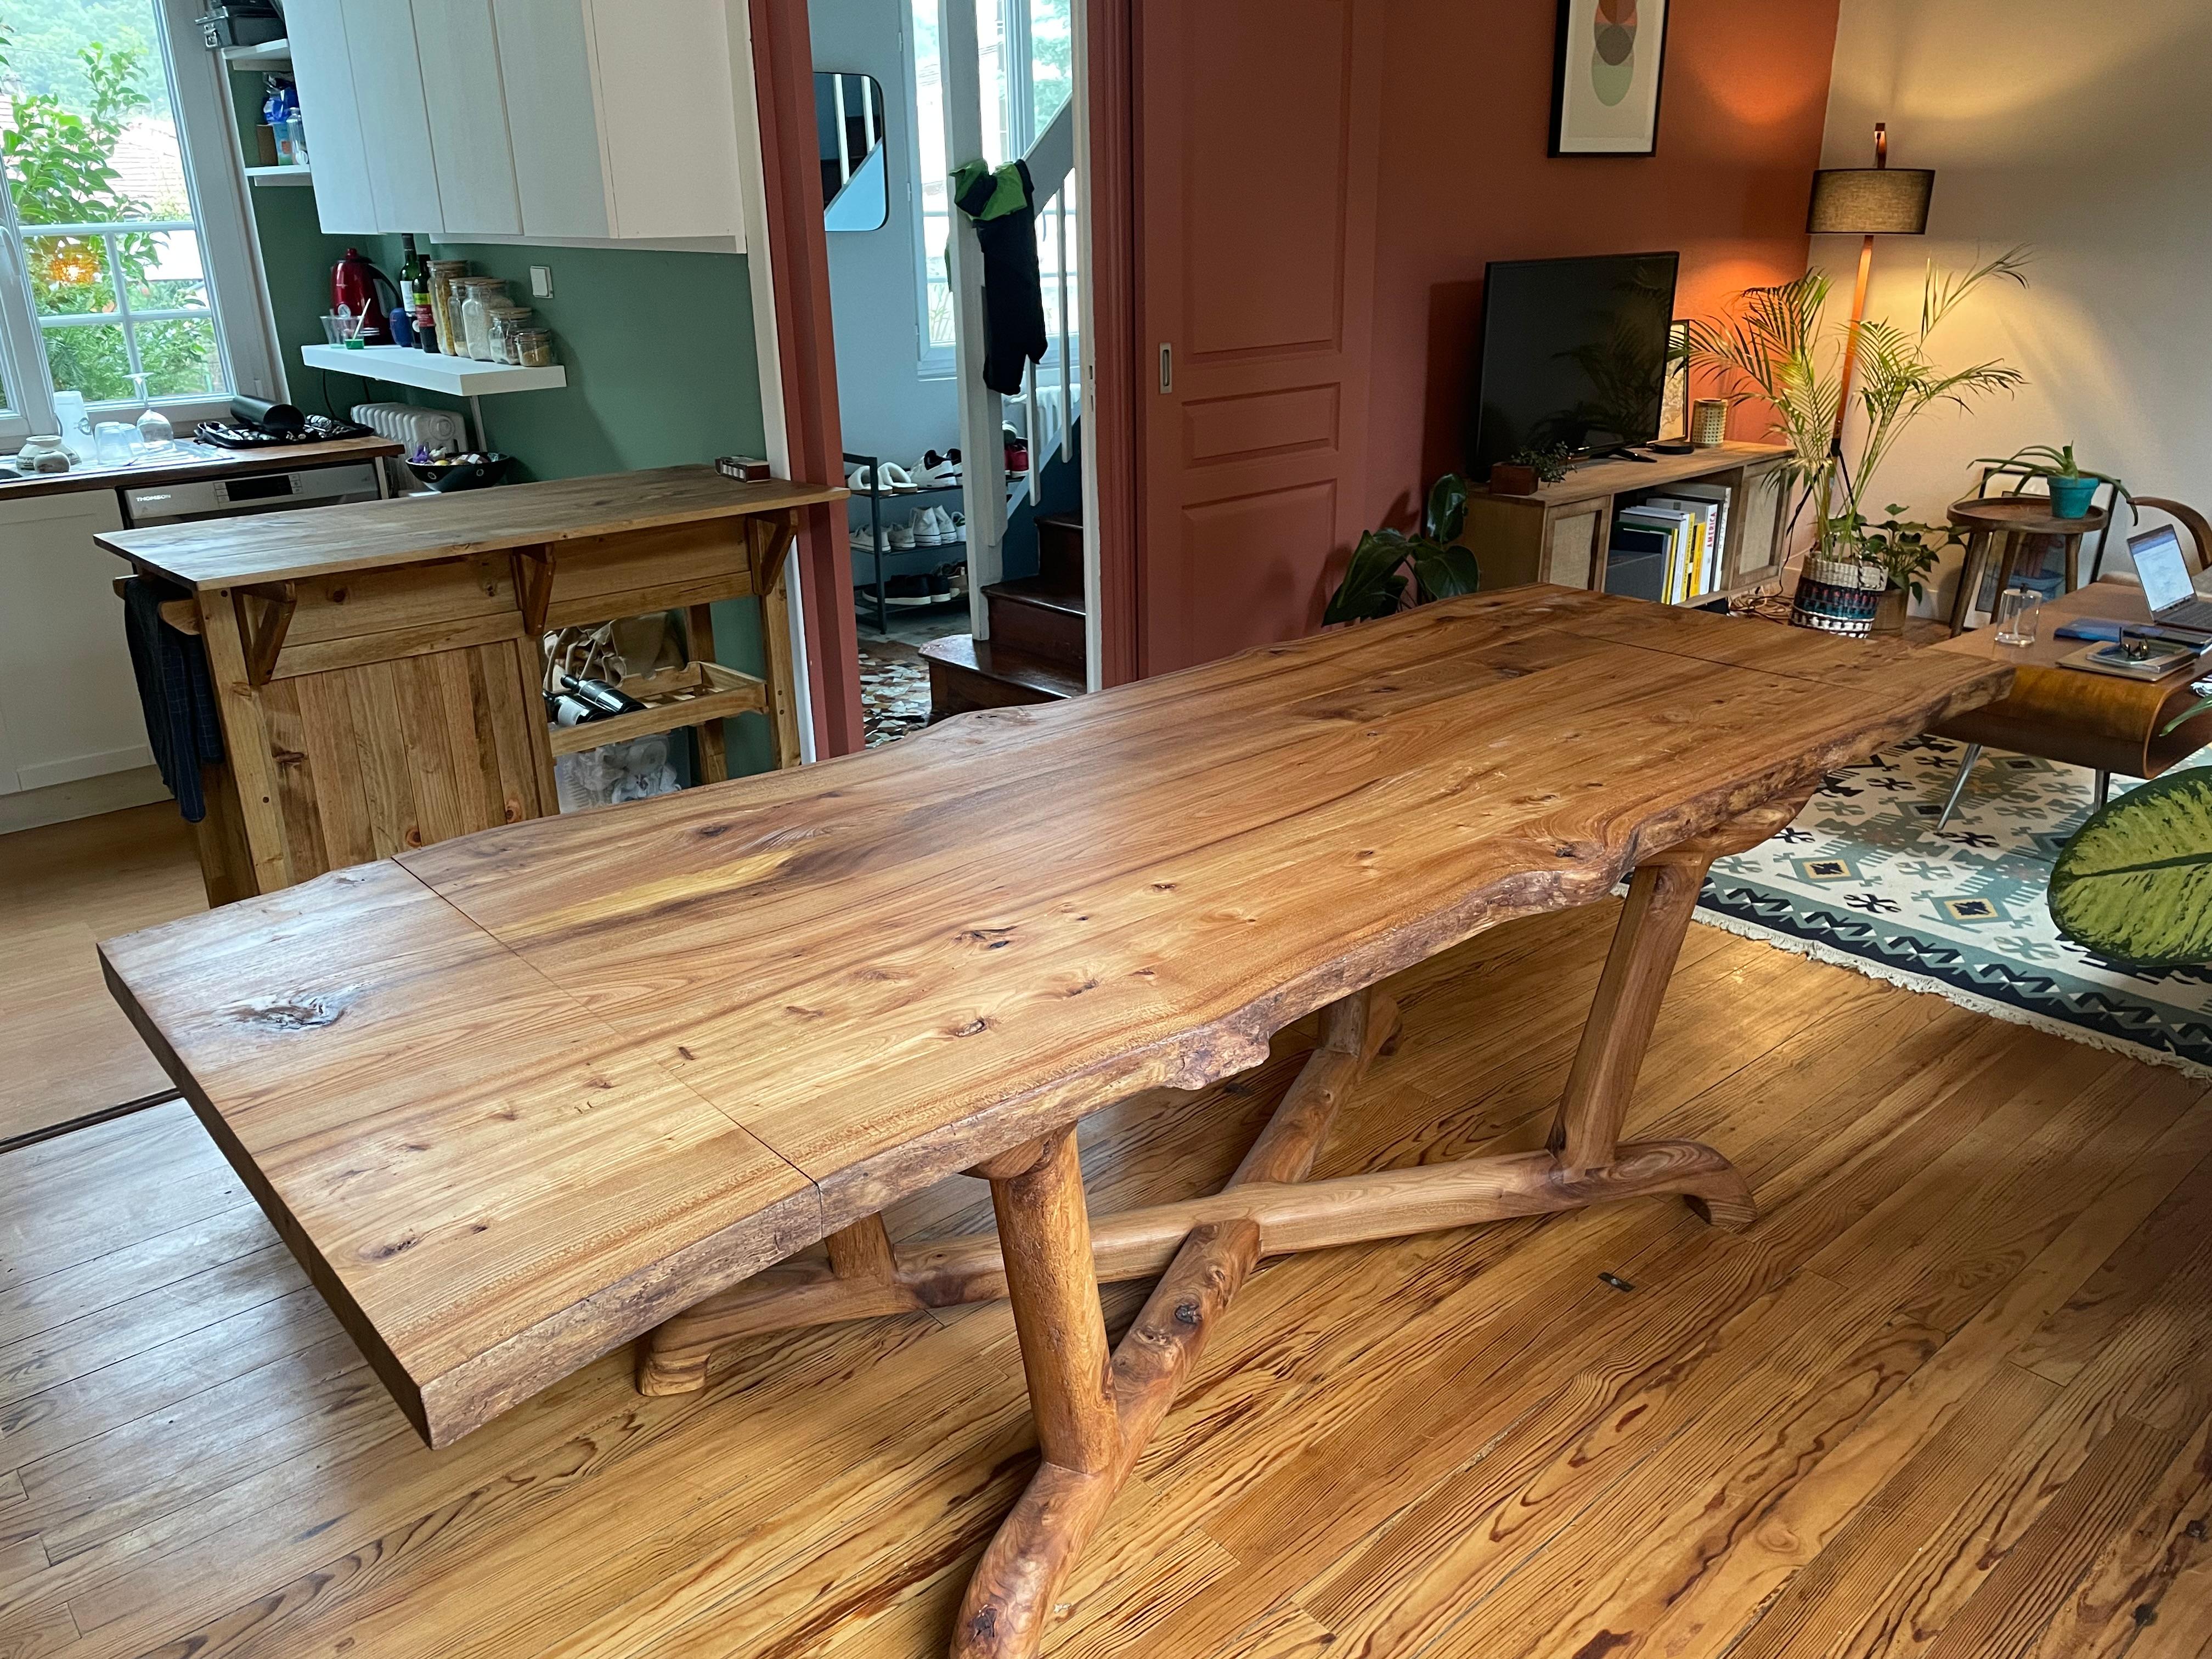 Woodwork Extendable Dining Table - Reclaimed Elm Wood For Sale